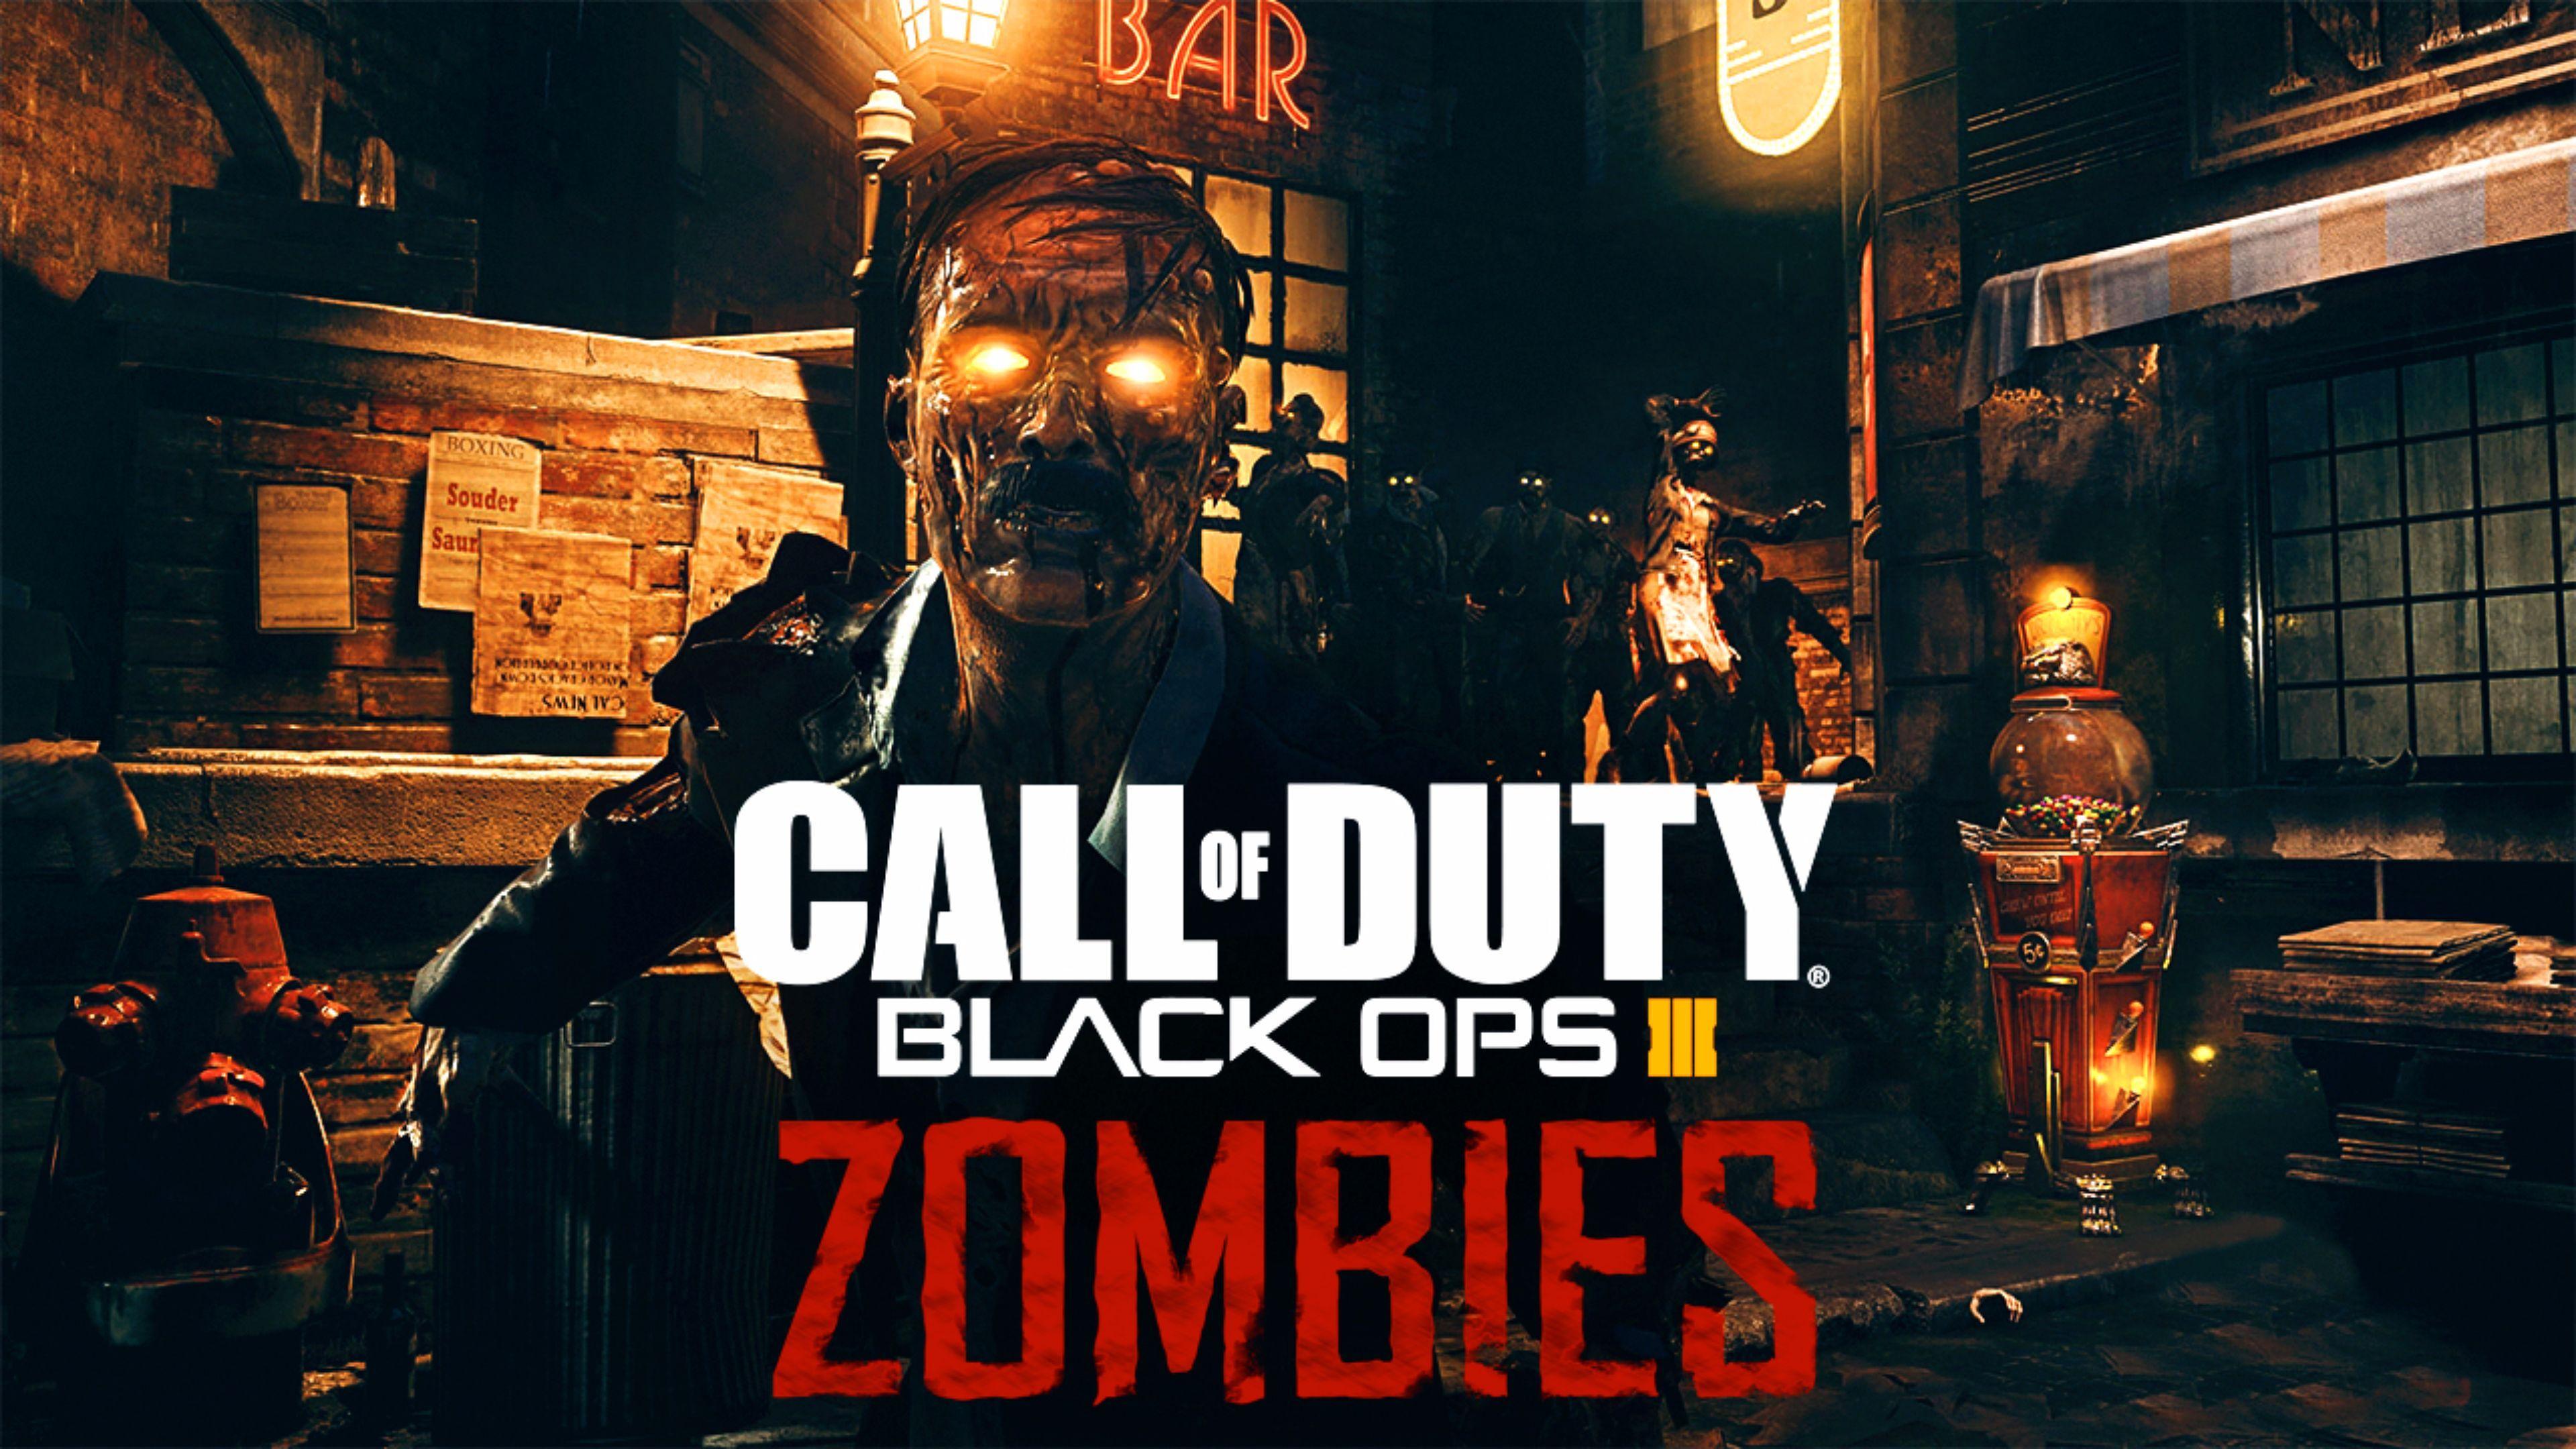 Call of Duty Black Ops 3 Zombies Wallpaper Free Call of Duty Black Ops 3 Zombies Background